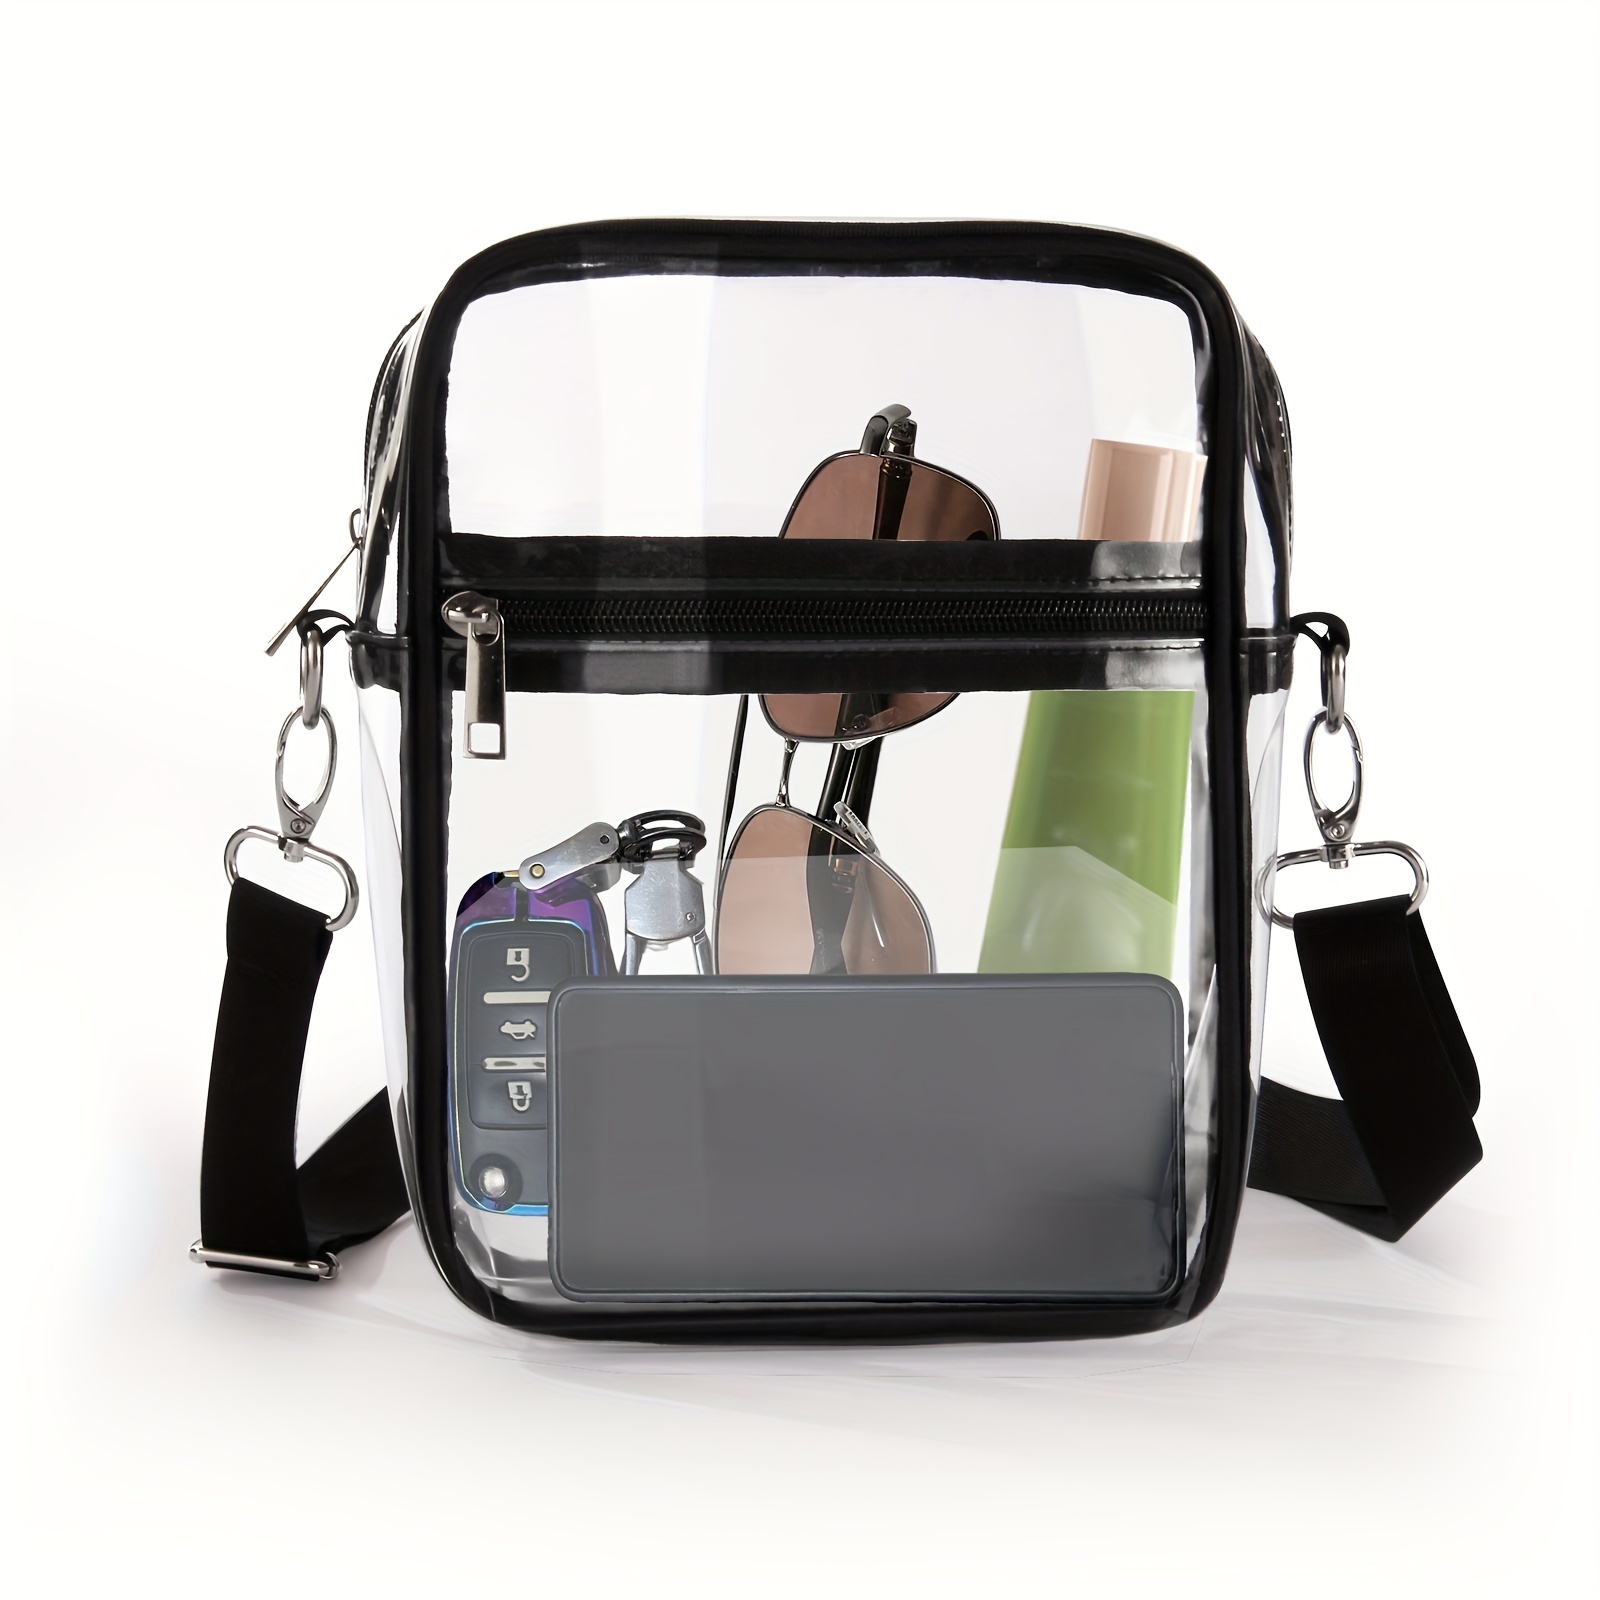 stadium approved clear crossbody bag